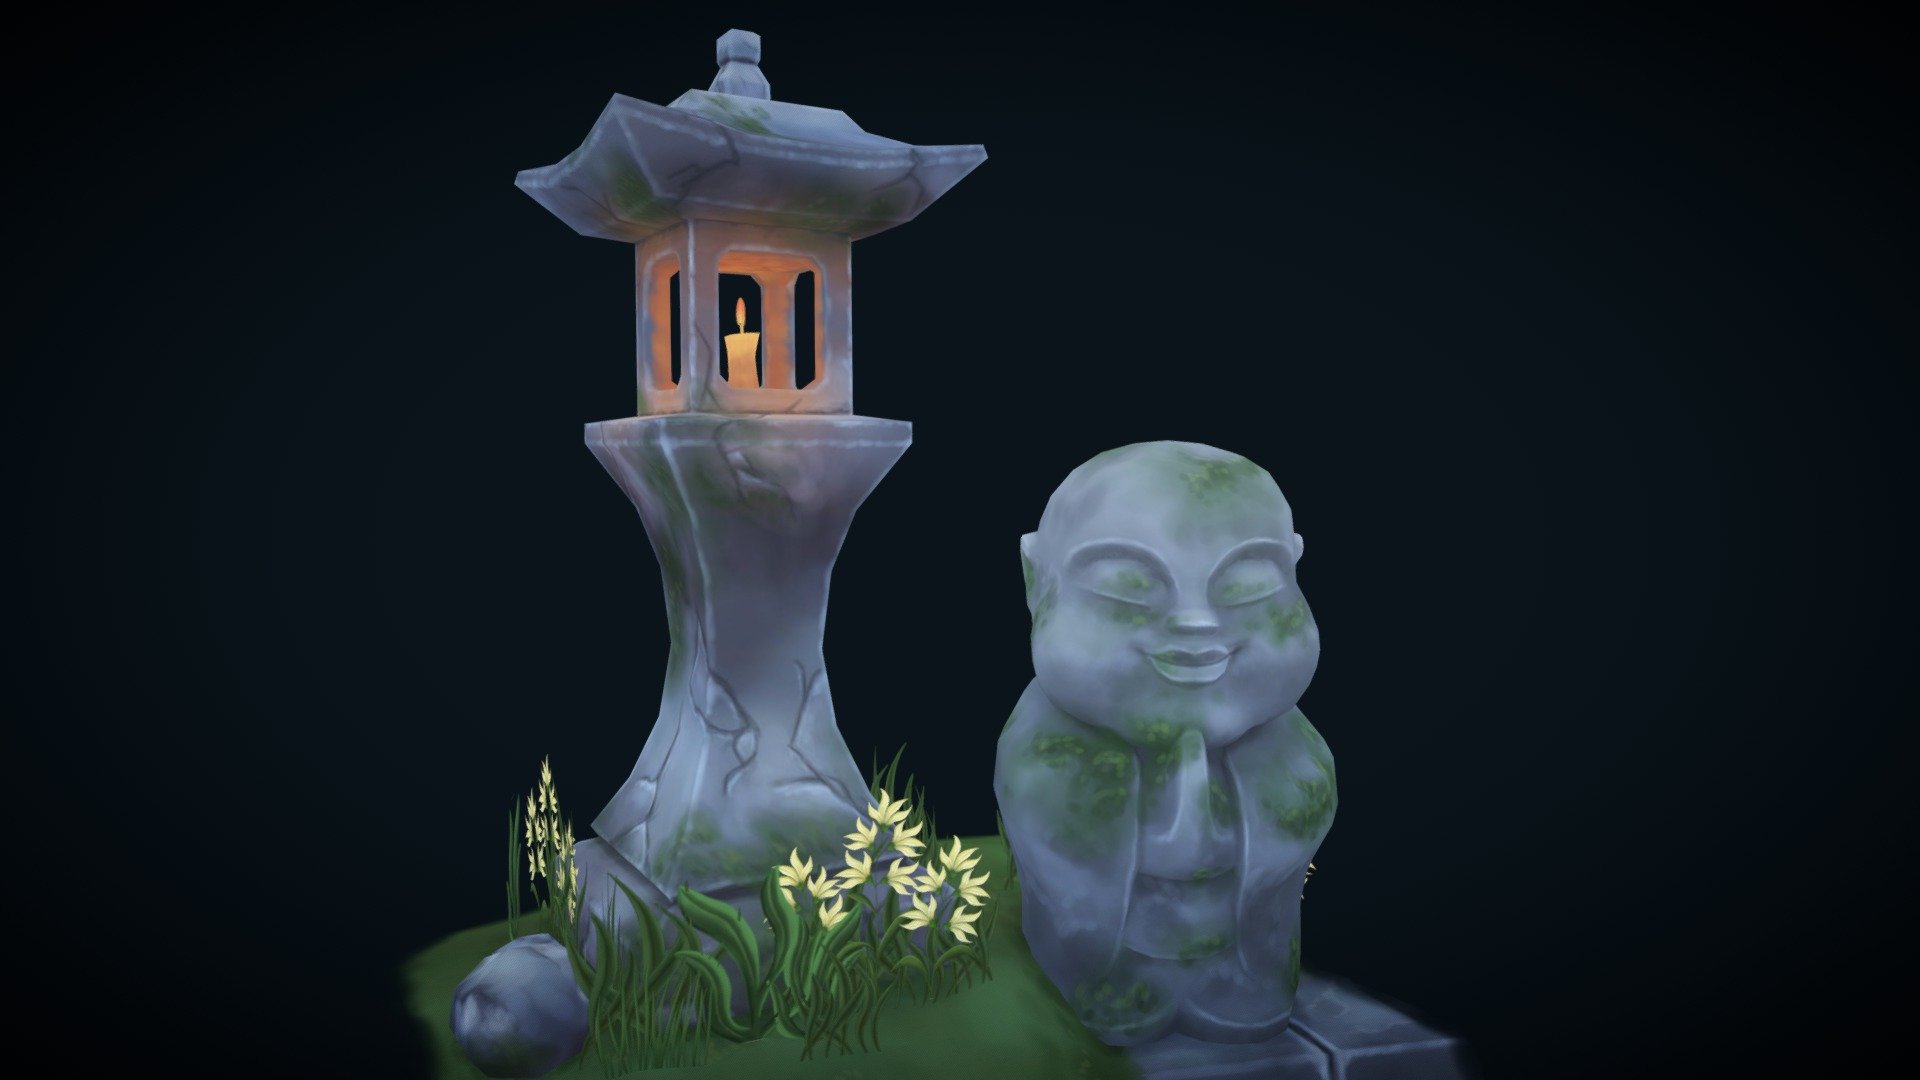 Low-poly model for video games. There is a source file in Blender 3.0 and Unity 2019.
https://www.artstation.com/sergeylysov - Japanese lantern - 3D model by SL (@low.3d) 3d model